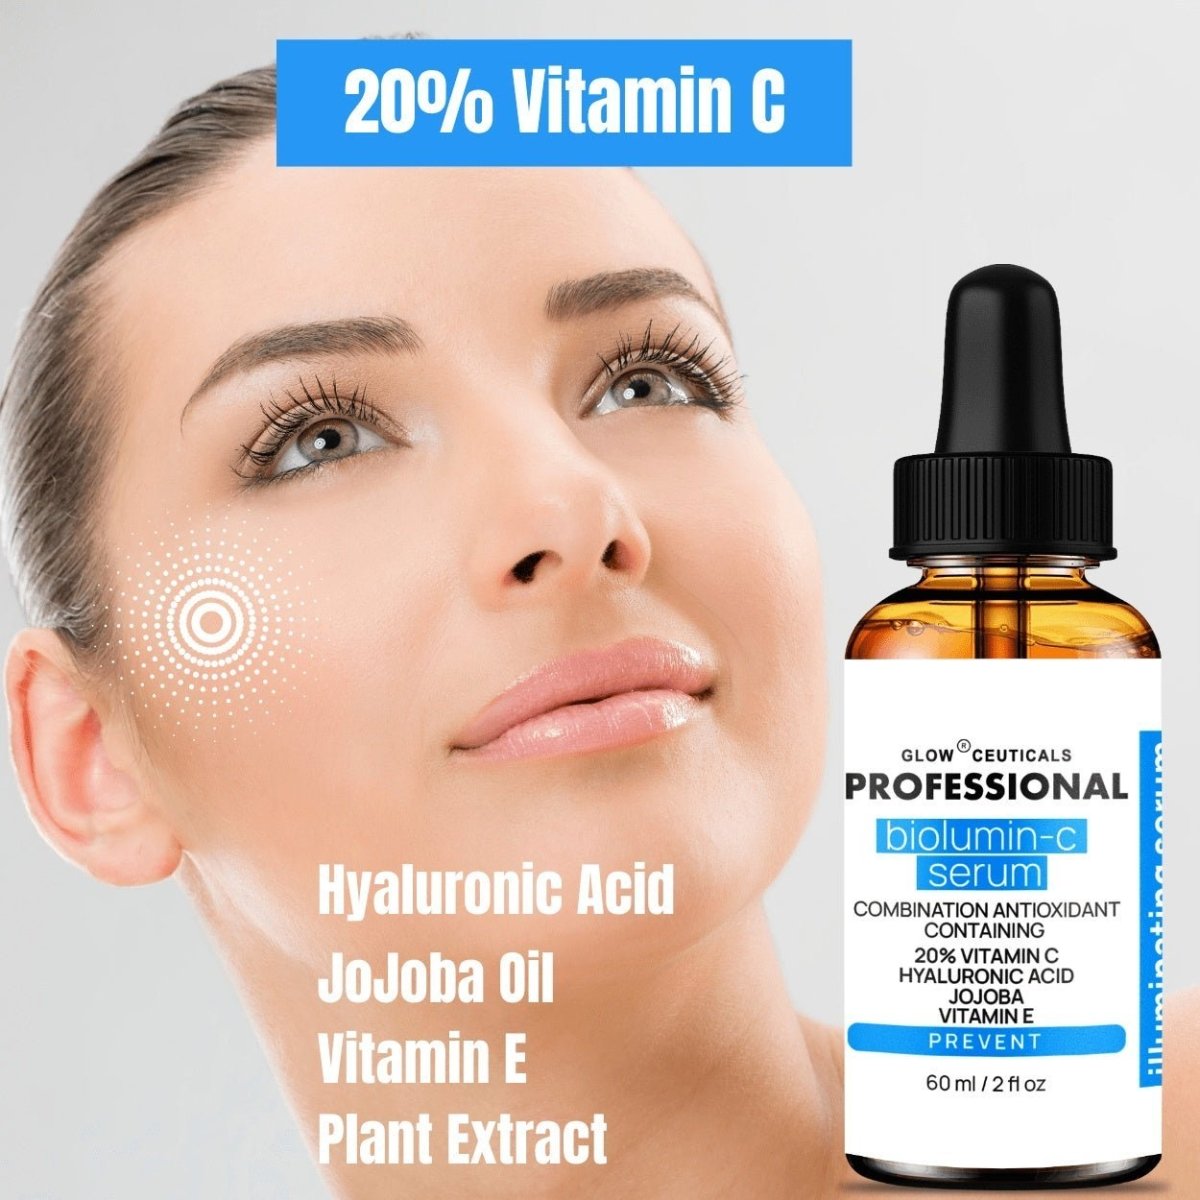 Vitamin C Serum Concentrate 20% - Ultimate Skin Renewal - Potent Anti-Aging Formula for Brighter, Firmer, and Radiant Skin | 60ml | 2-Pack